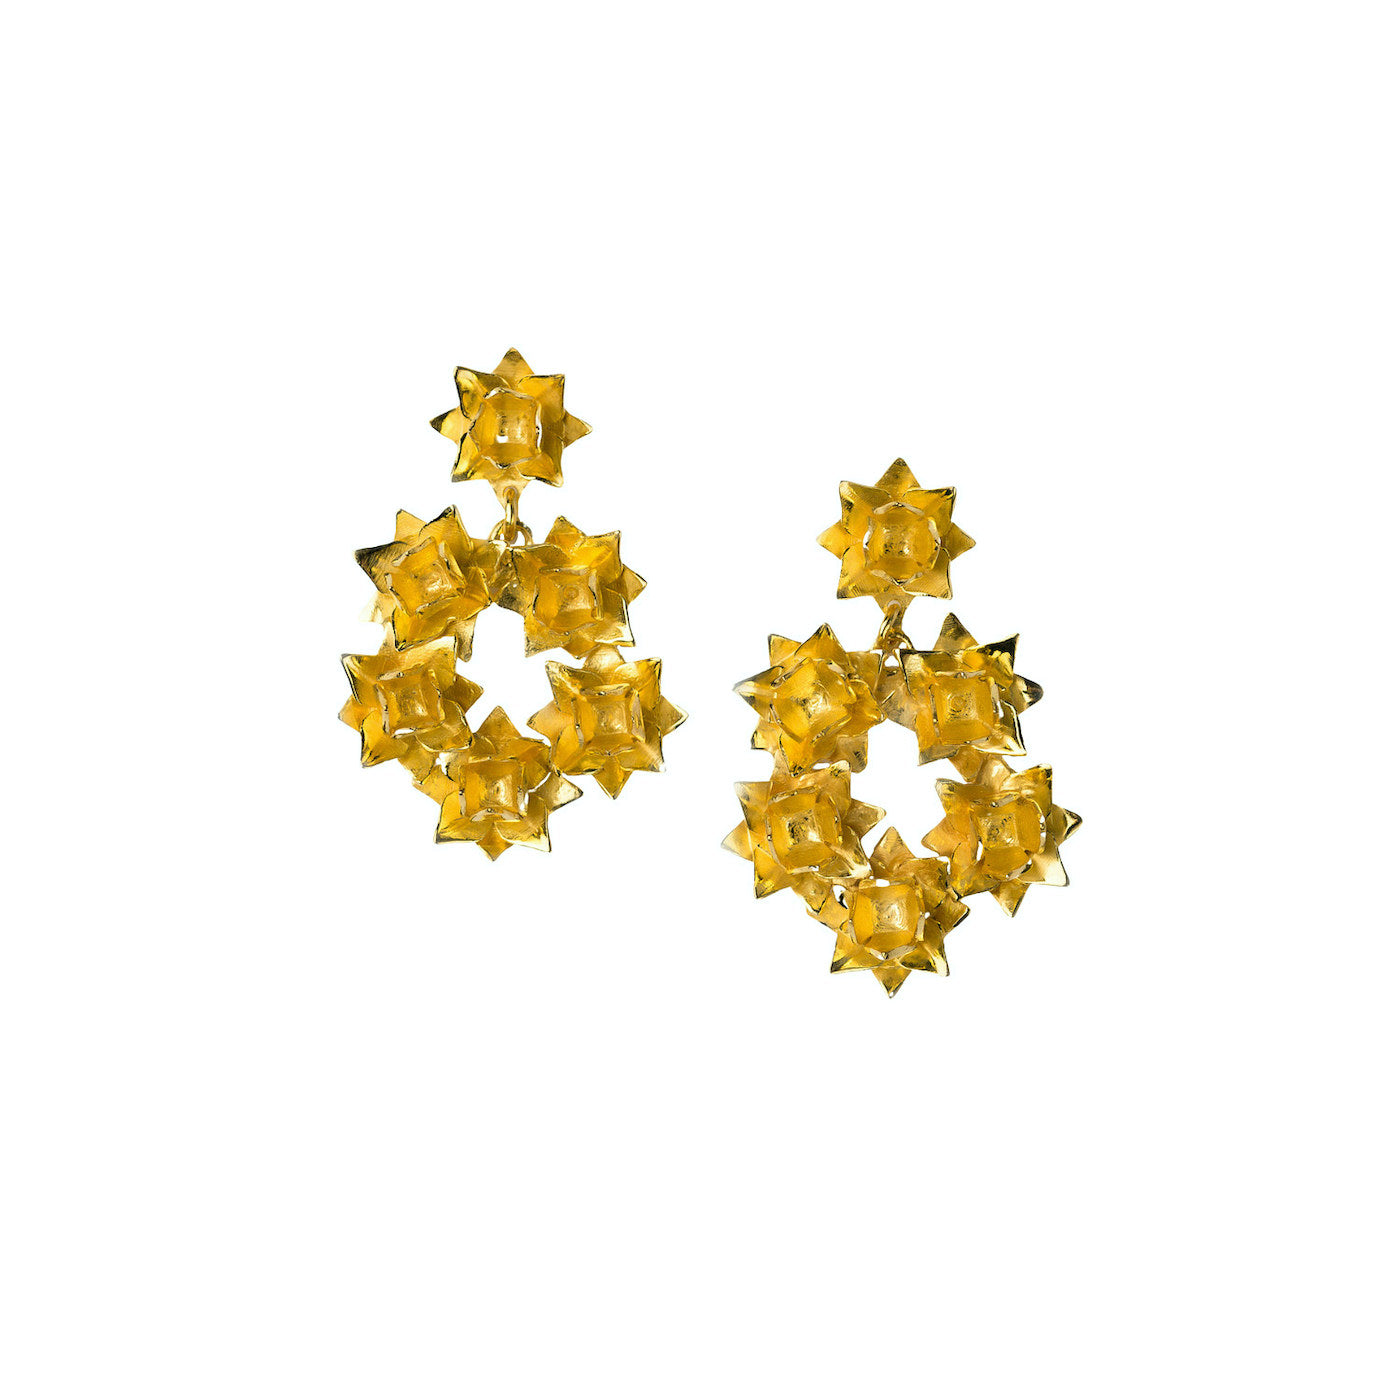 gold lotus wreath earrings on white background